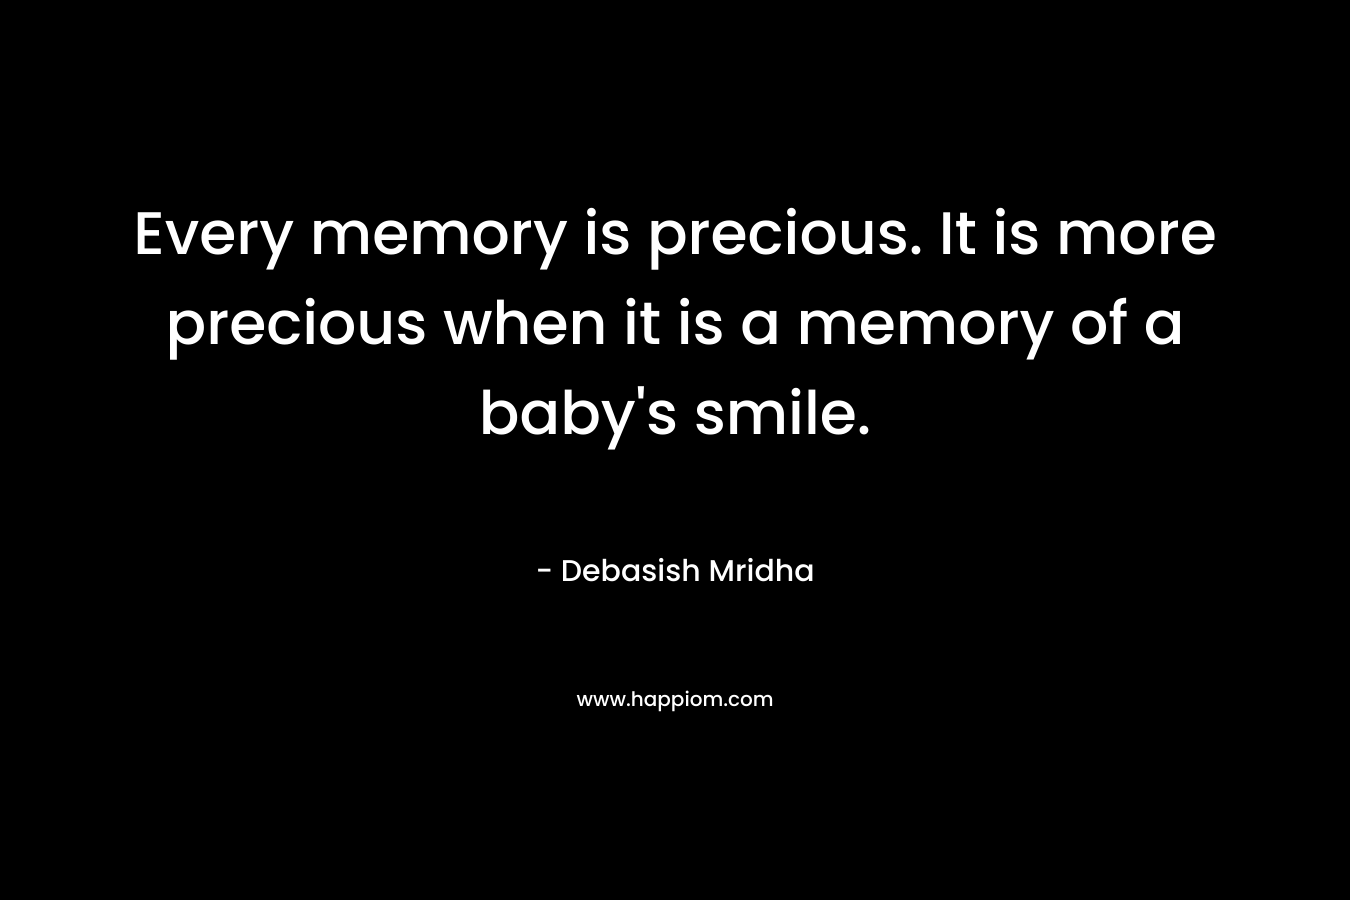 Every memory is precious. It is more precious when it is a memory of a baby's smile.